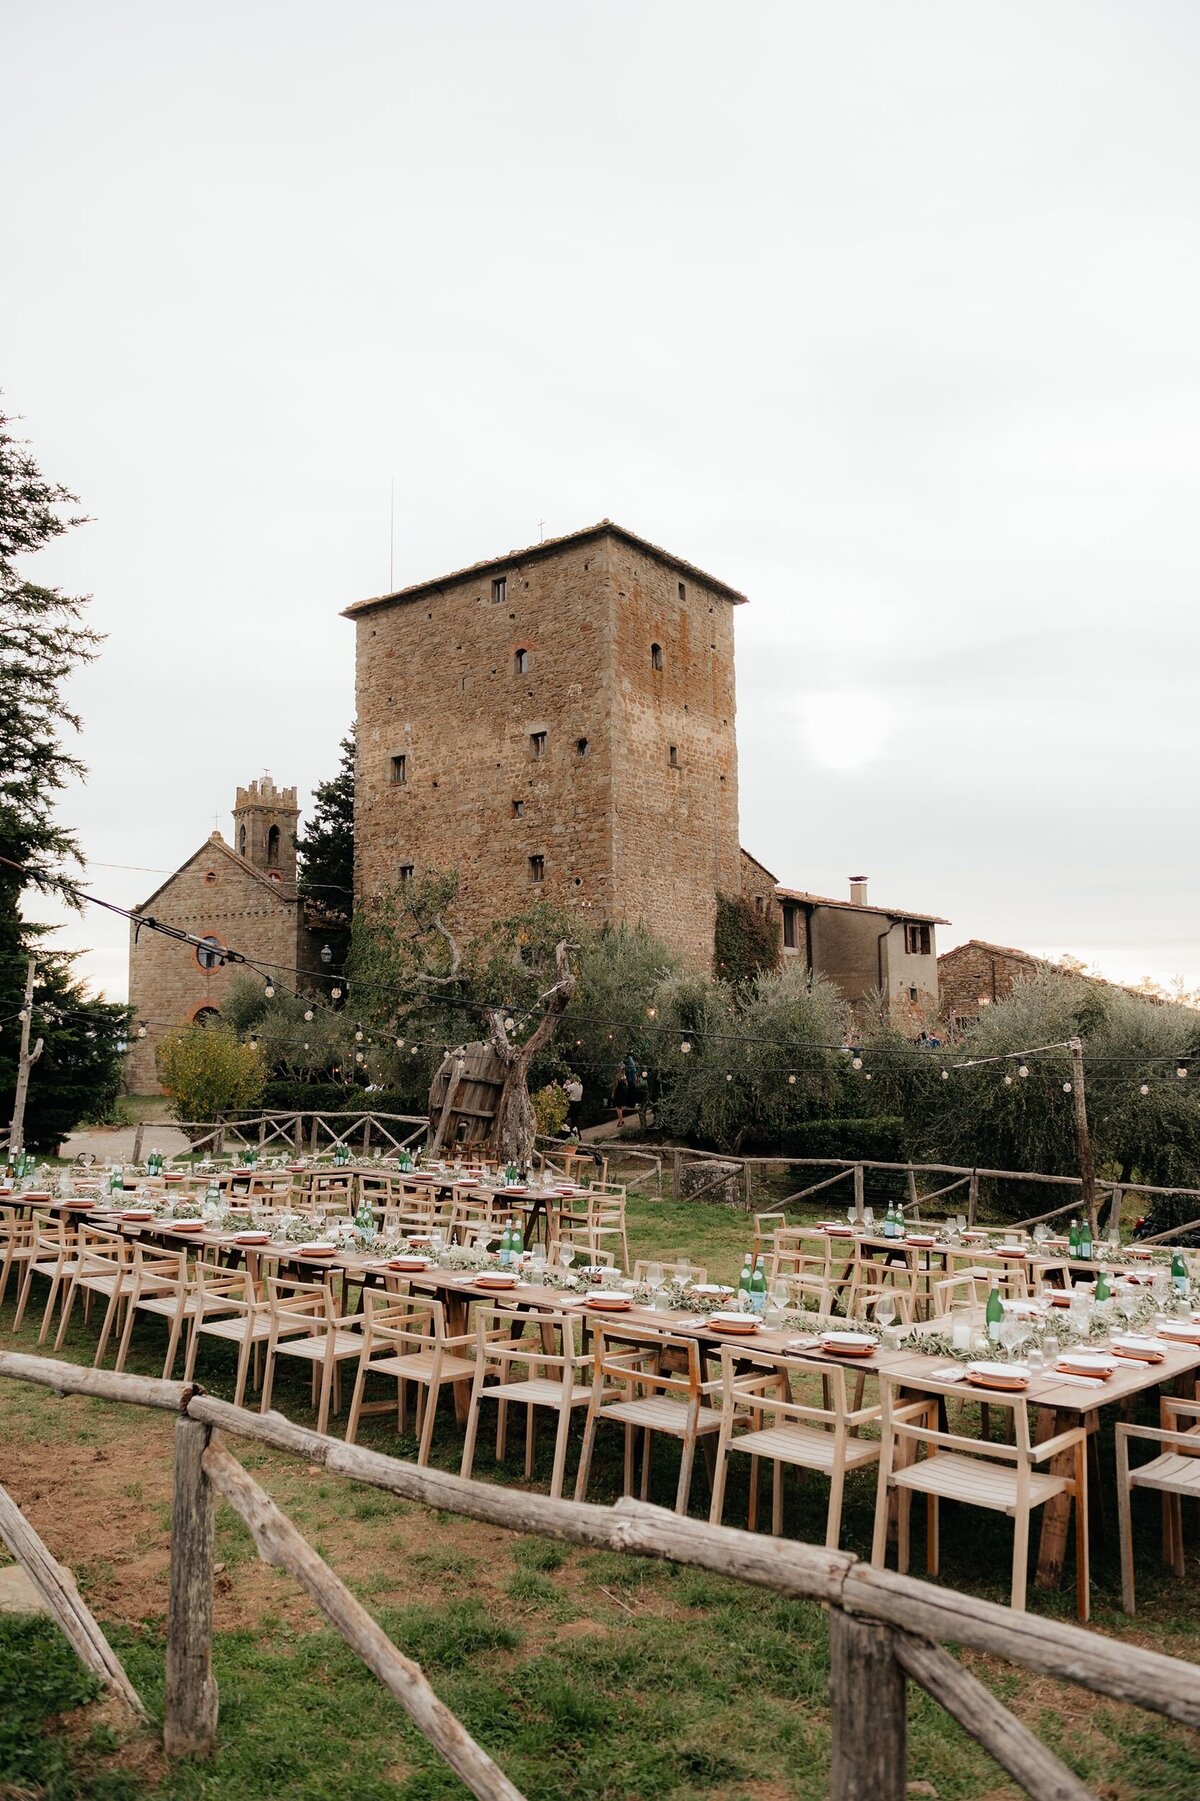 Pete and Brenna's Tuscany wedding